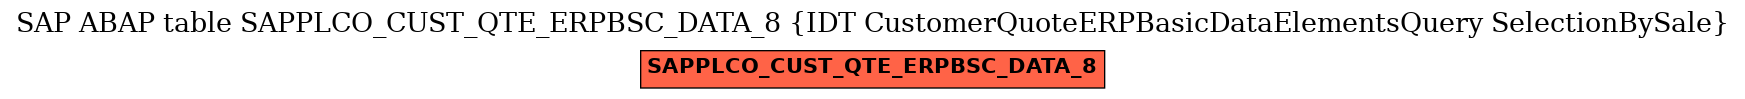 E-R Diagram for table SAPPLCO_CUST_QTE_ERPBSC_DATA_8 (IDT CustomerQuoteERPBasicDataElementsQuery SelectionBySale)